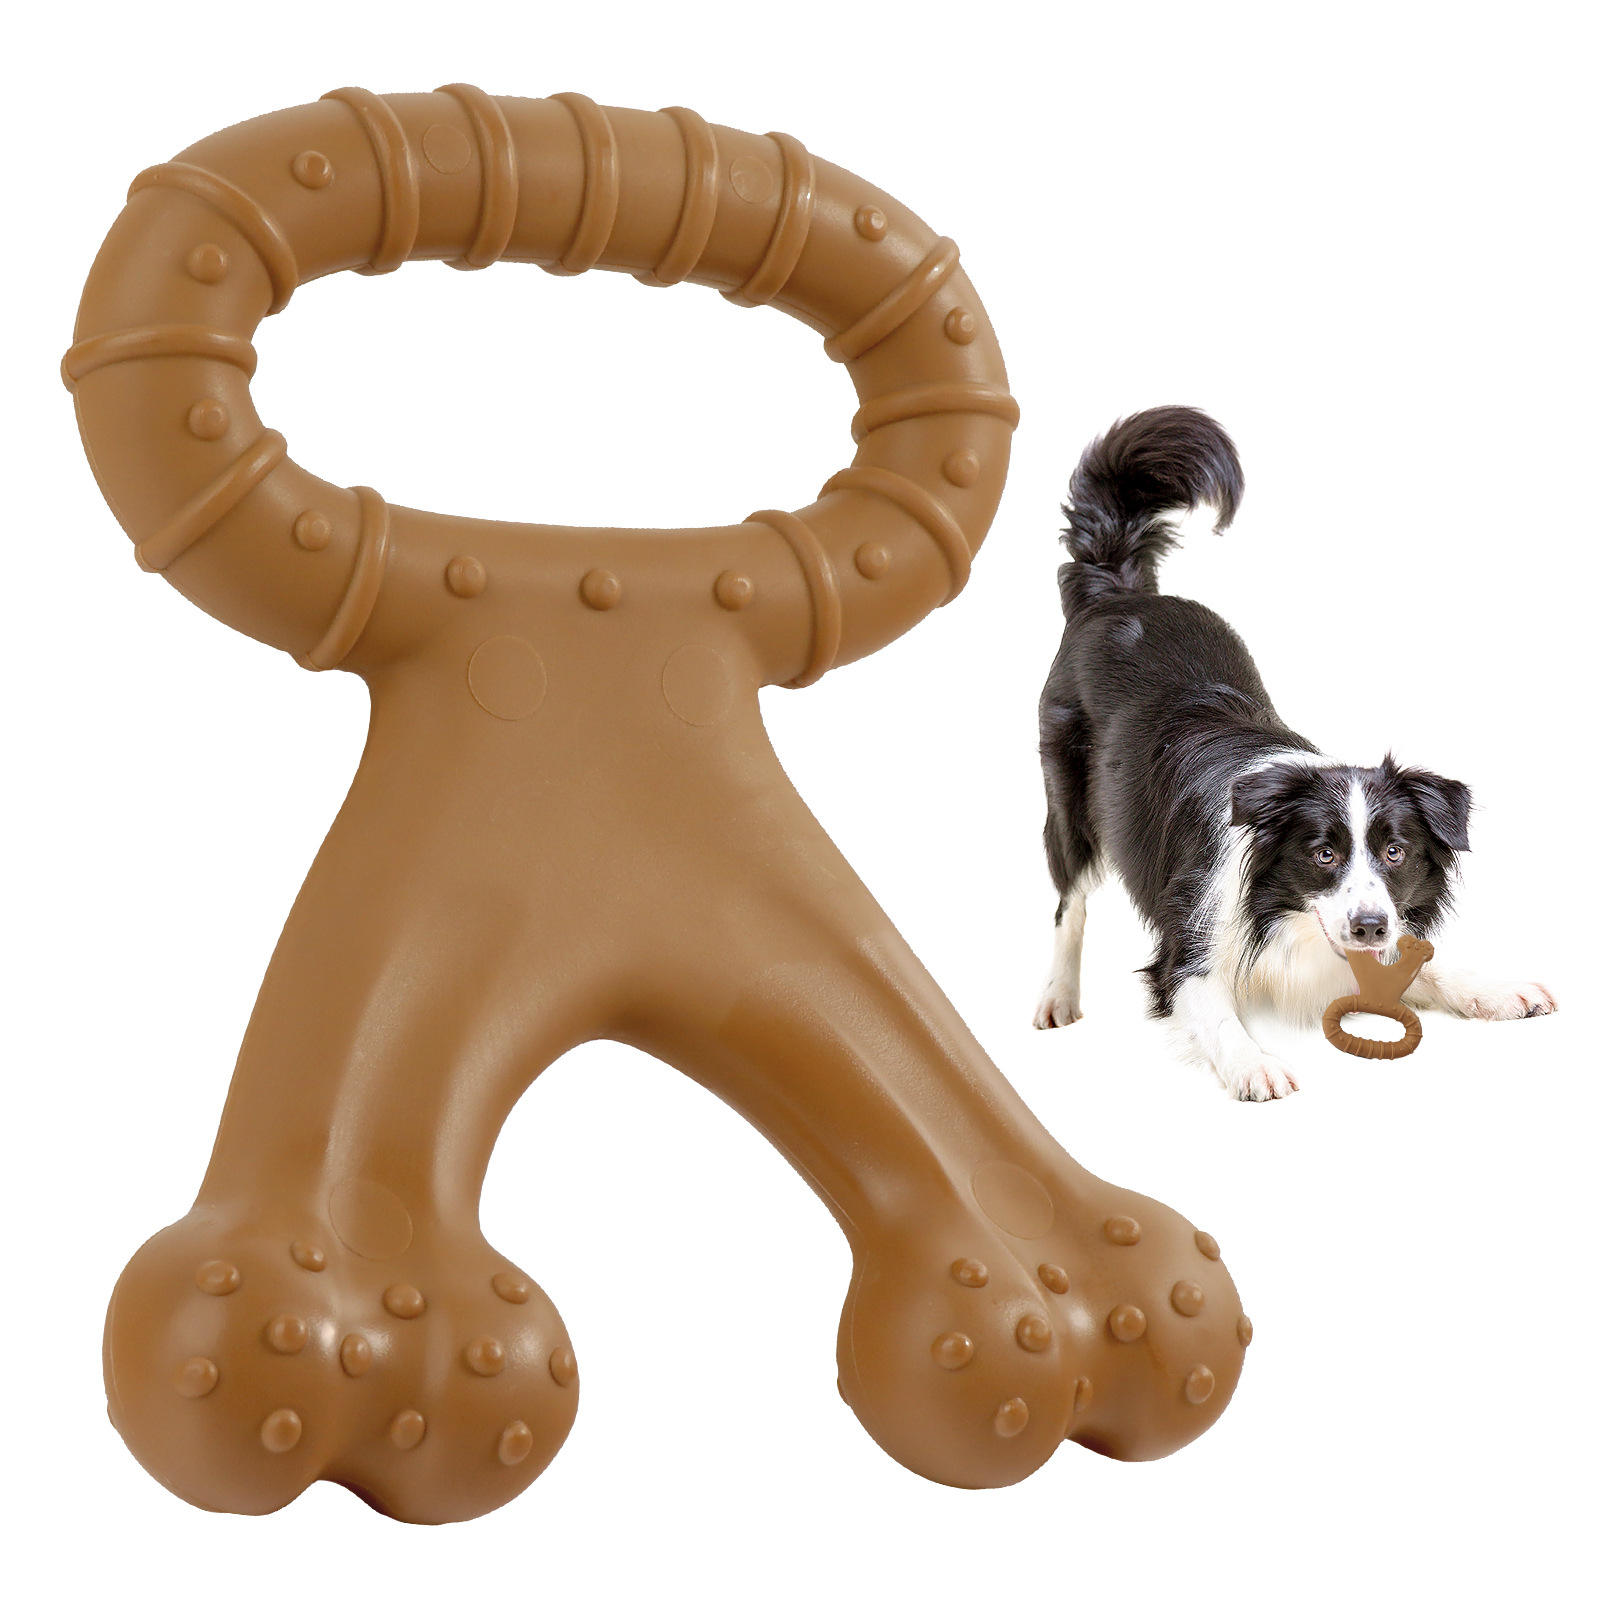 Wholesale Durable Dog Chew Toys For Aggressive Chewers Bacon Dog Bone Toys Can Be Given As Christmas Gifts To Dogs